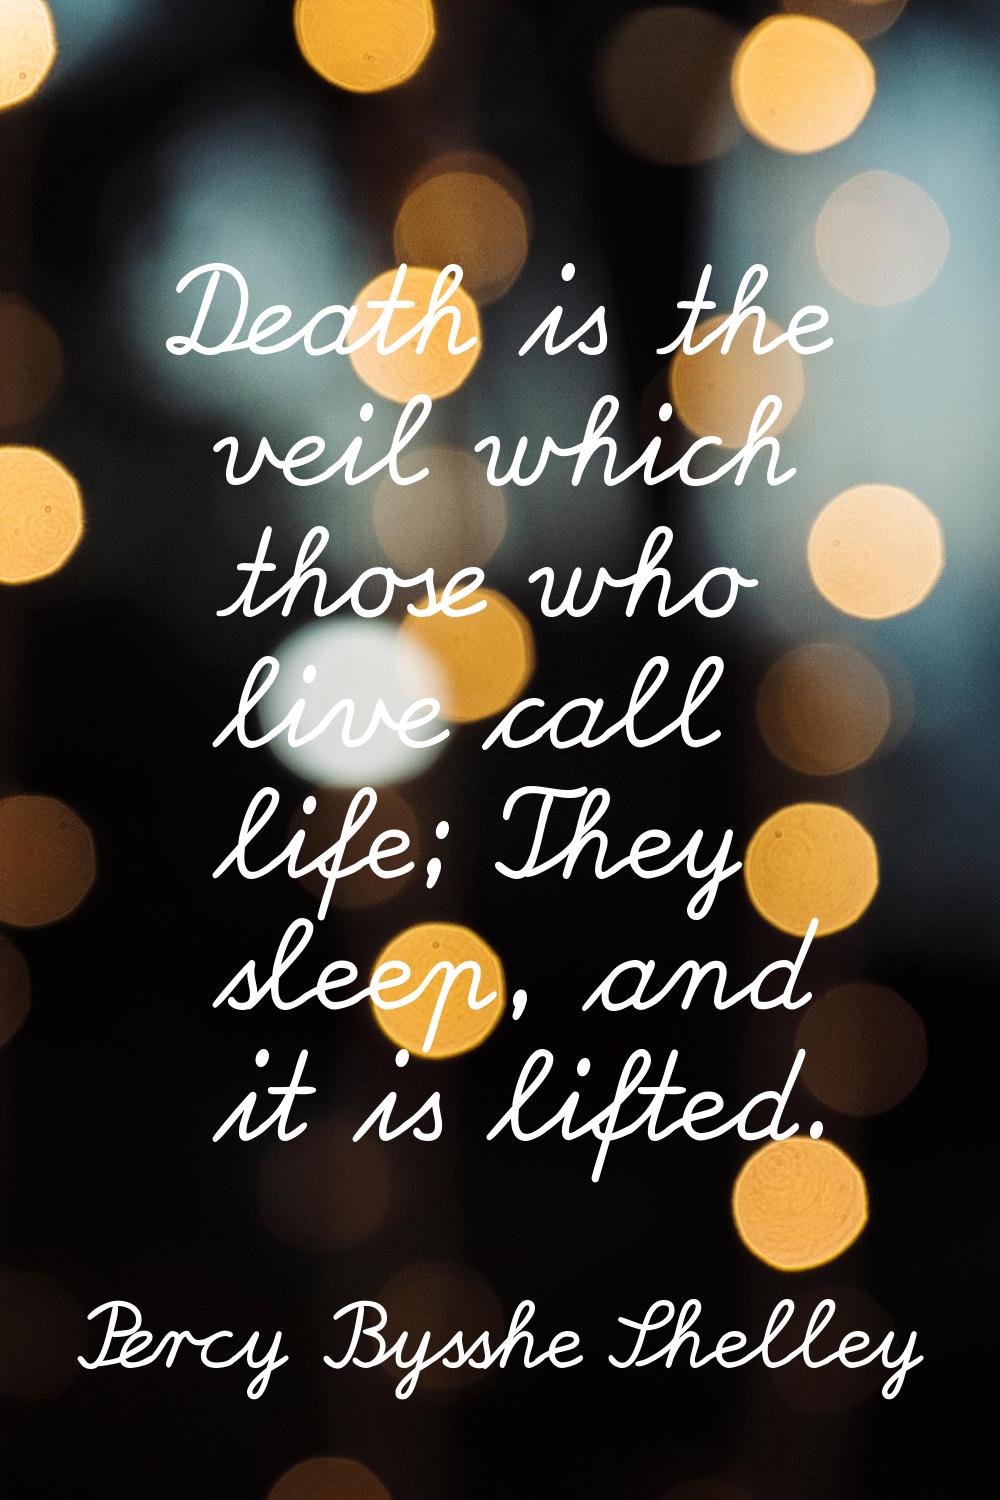 Death is the veil which those who live call life; They sleep, and it is lifted.